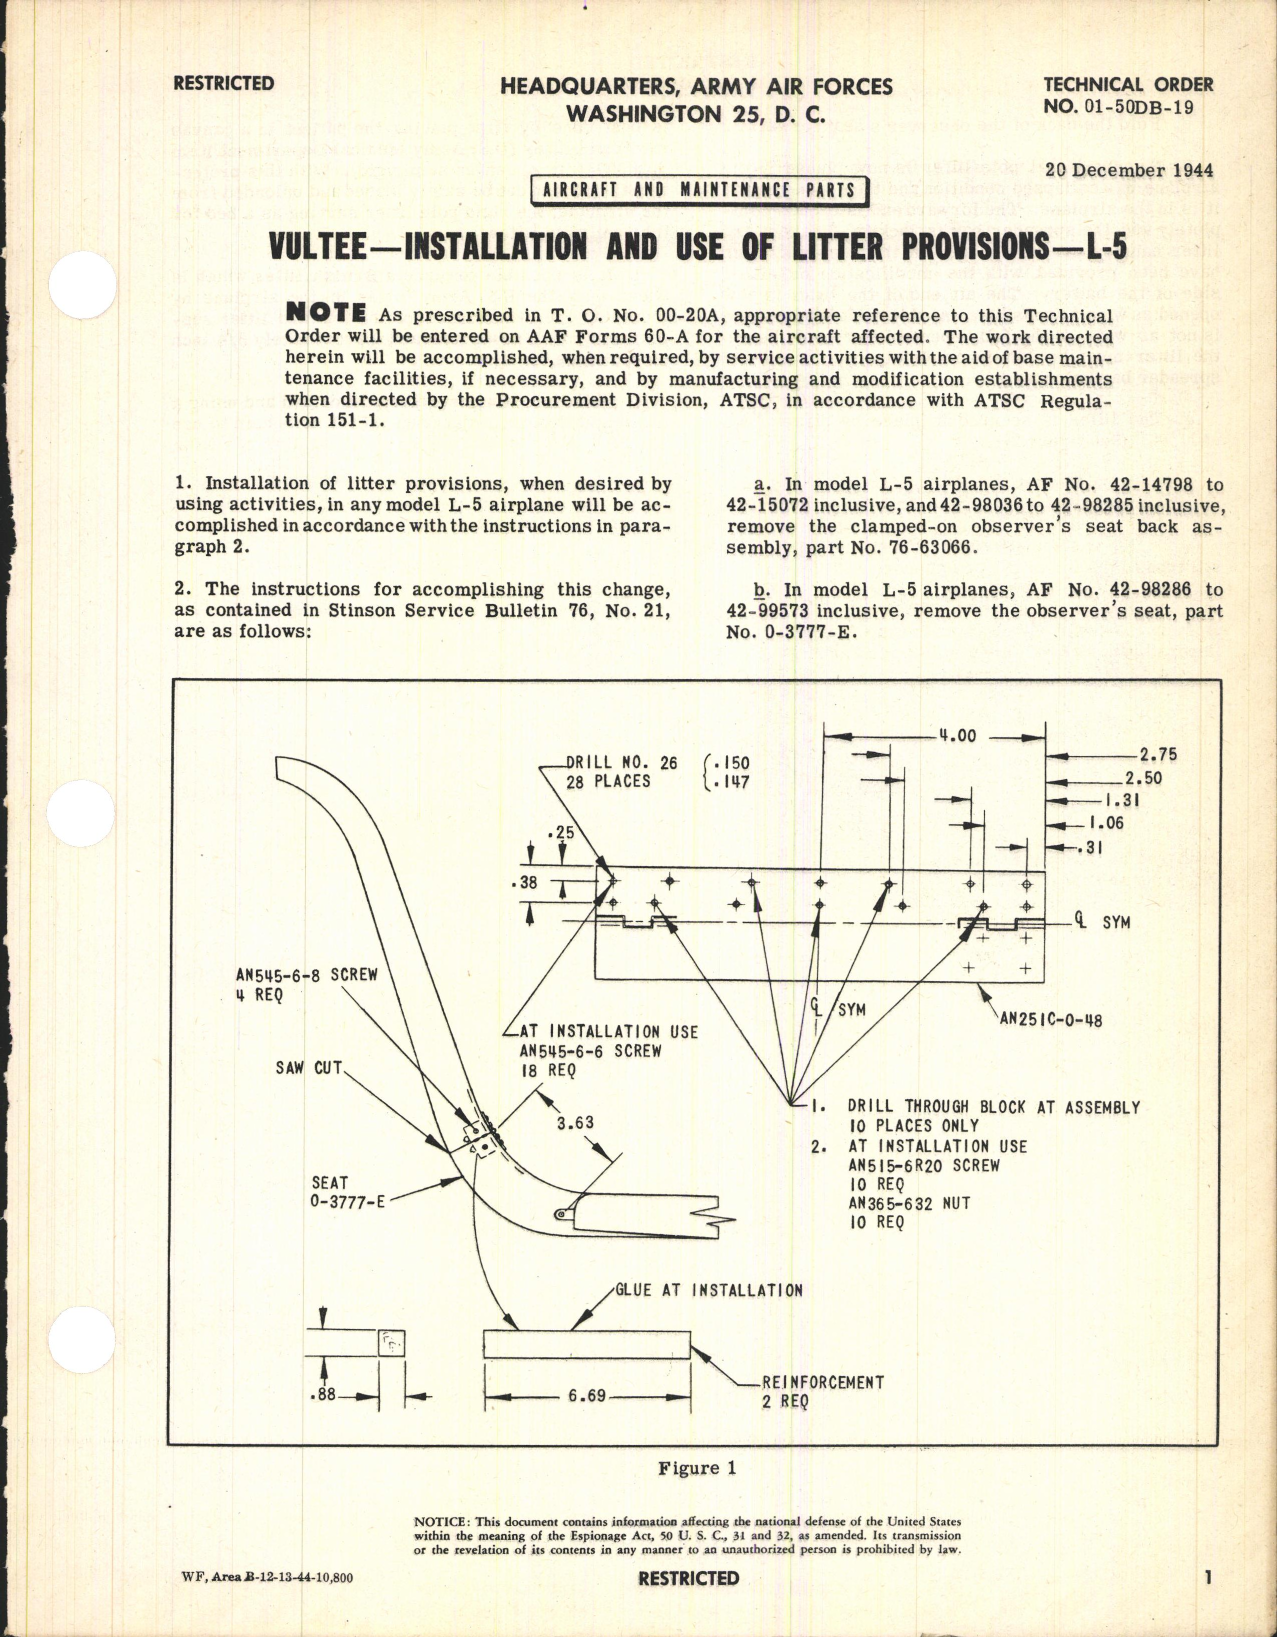 Sample page 1 from AirCorps Library document: Installation and Use of Litter Provisions for L-5